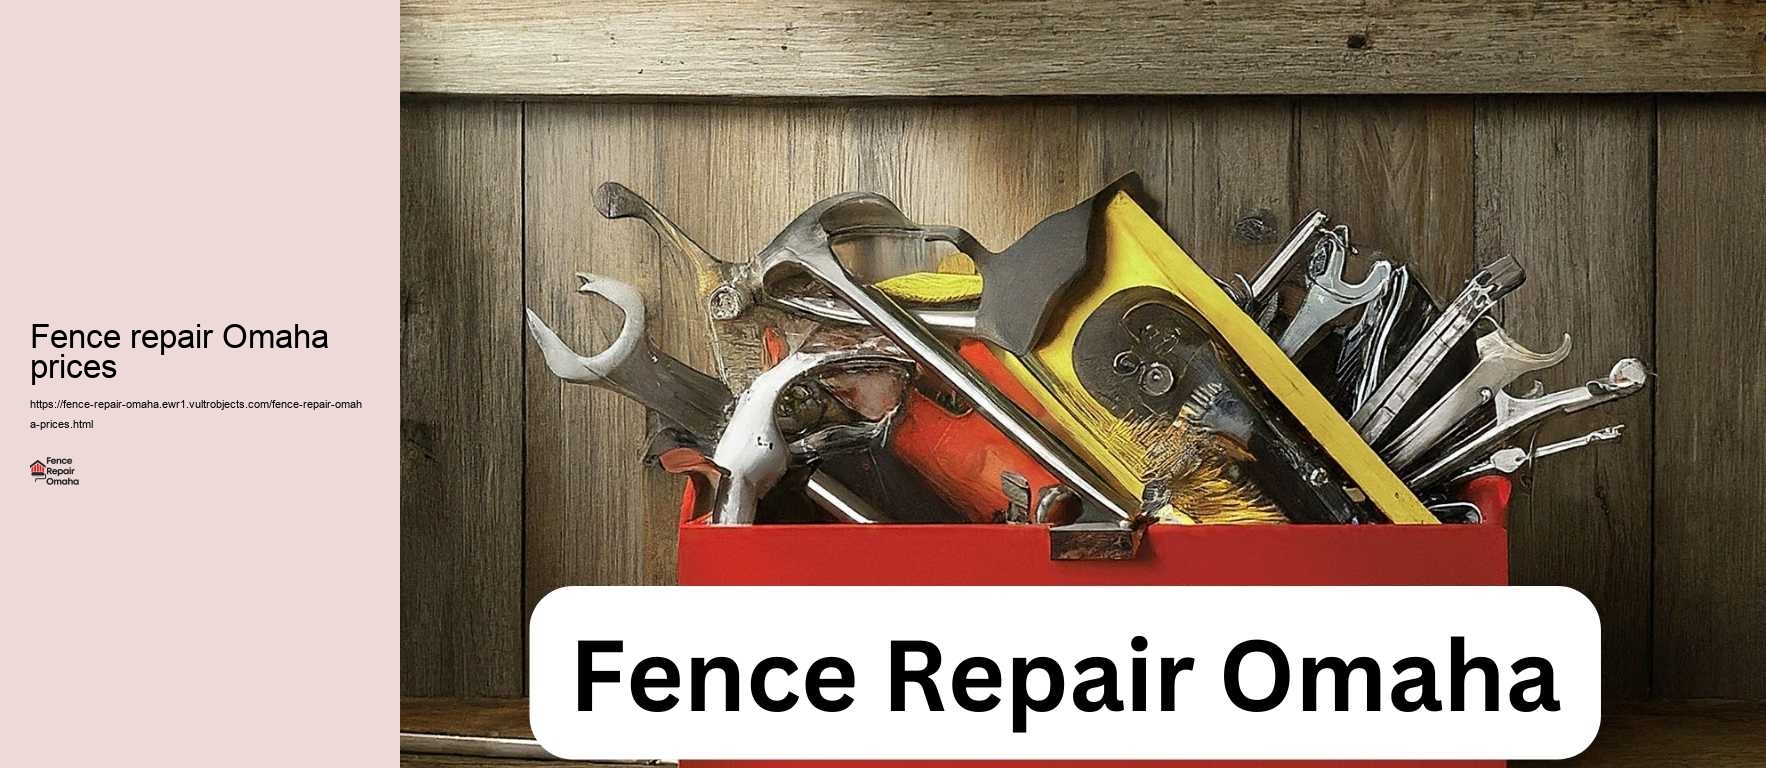 Fence repair Omaha prices